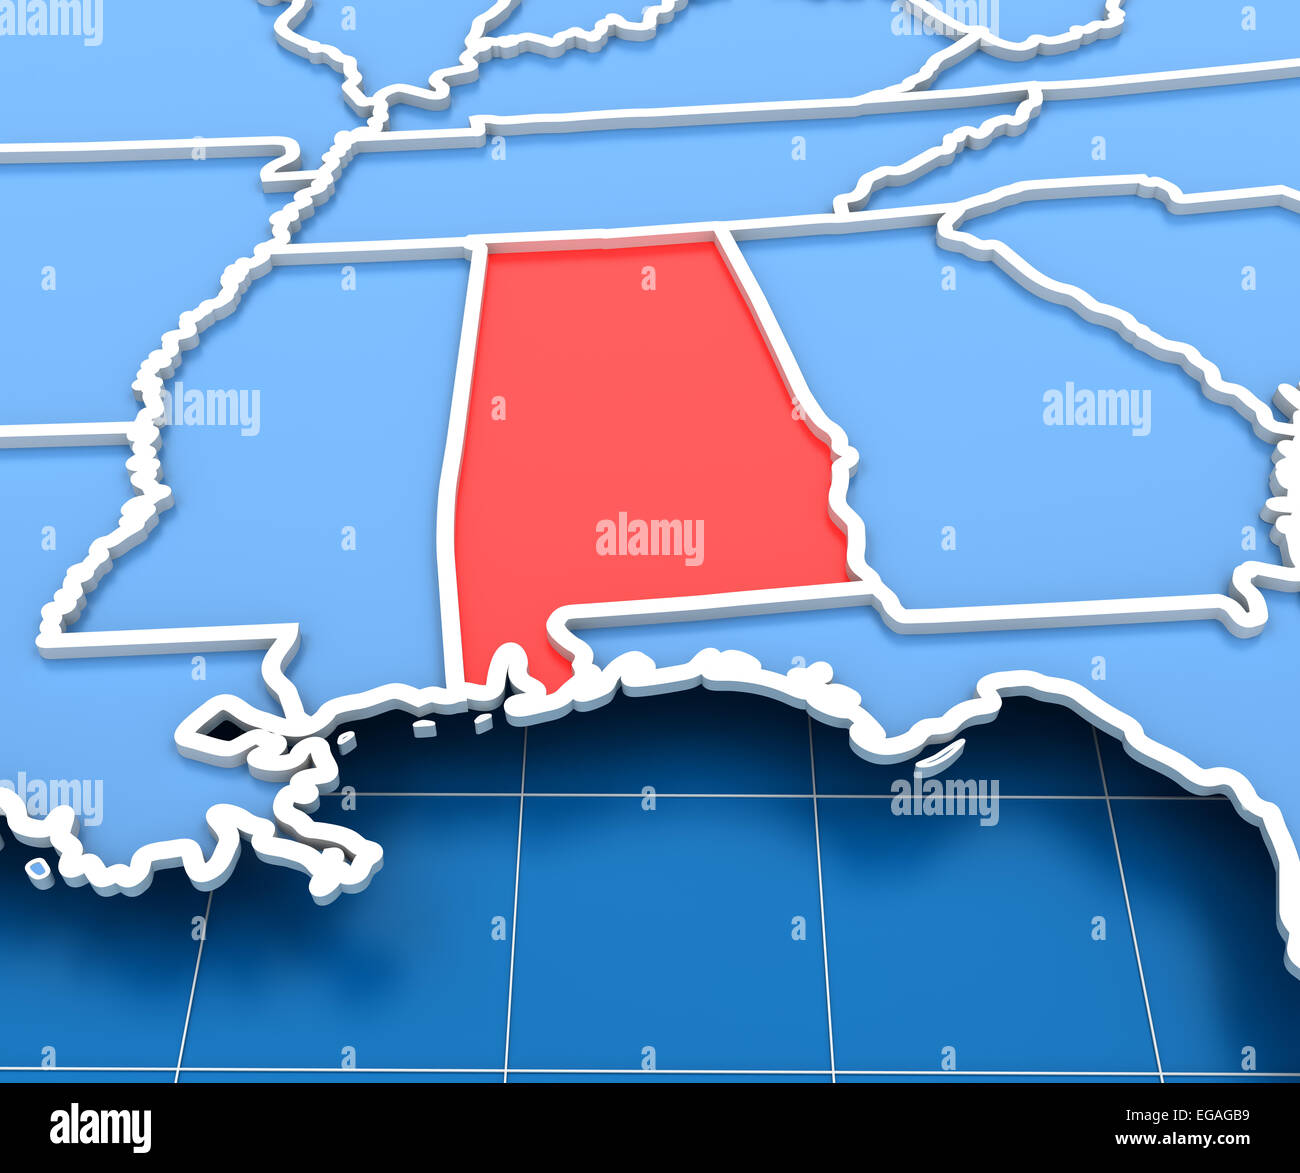 Alabama State Illustration Hi Res Stock Photography And Images Alamy